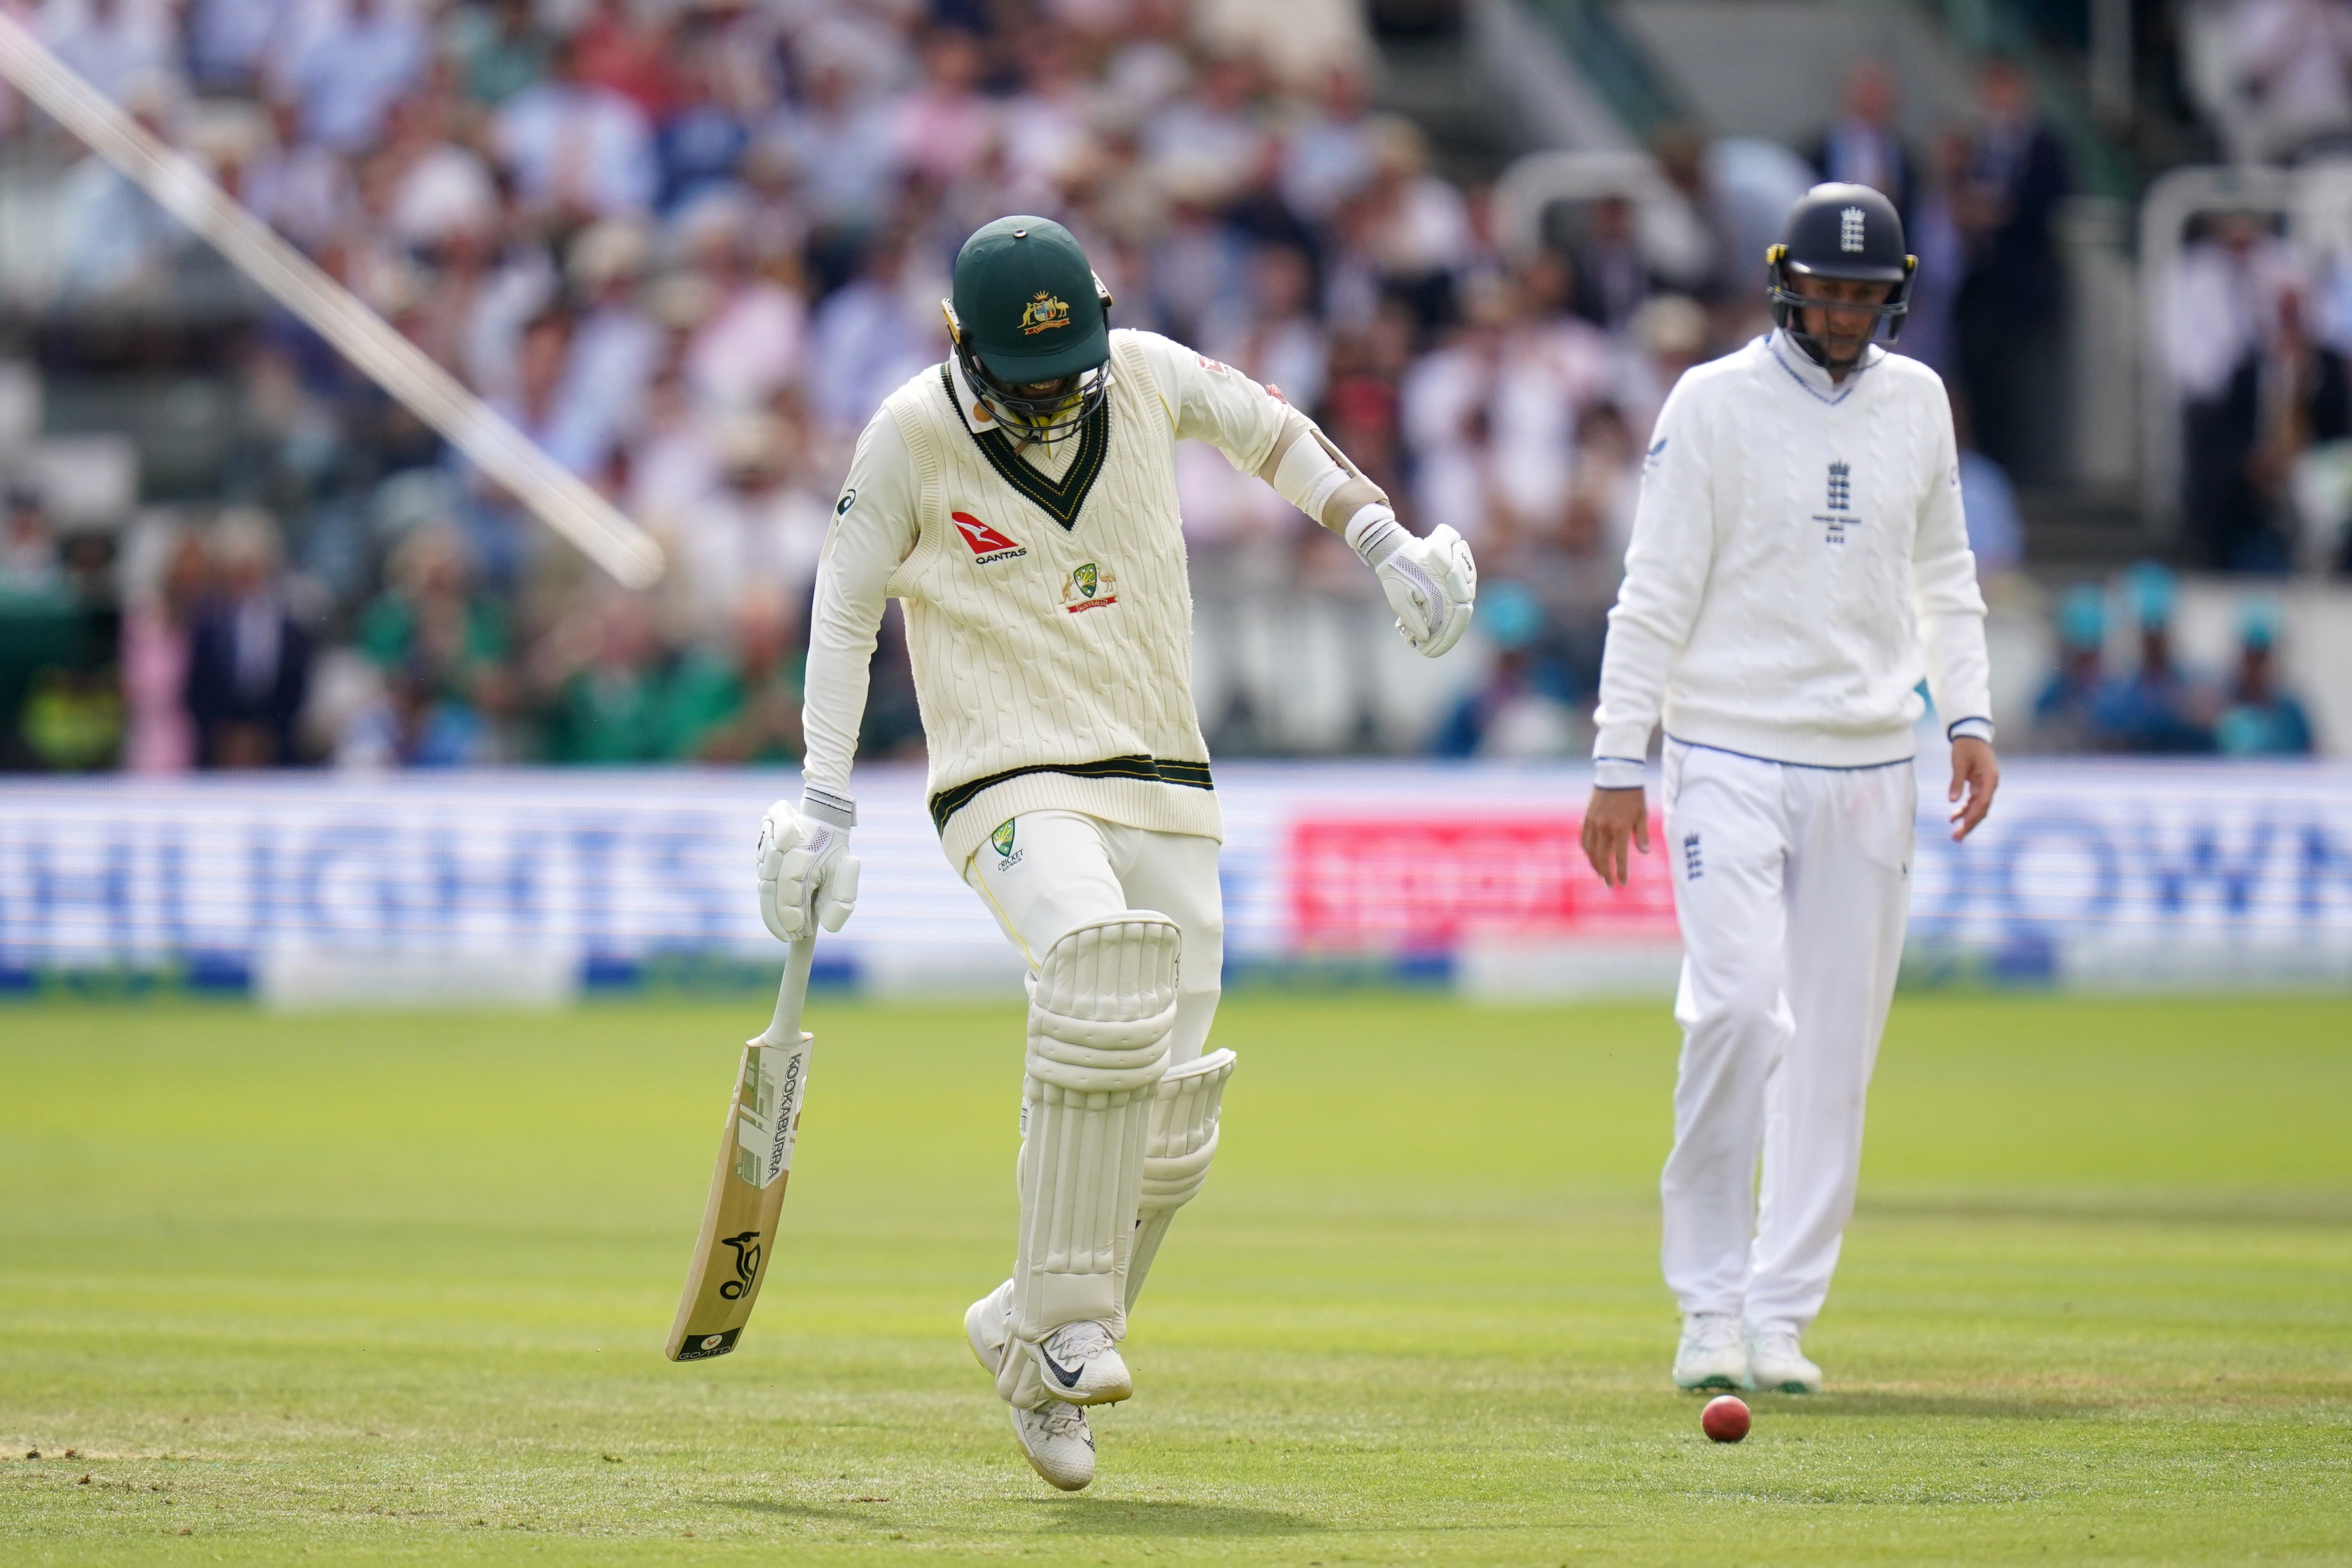 A hobbled Nathan Lyon bravely batted on day four of the Lord’s Test